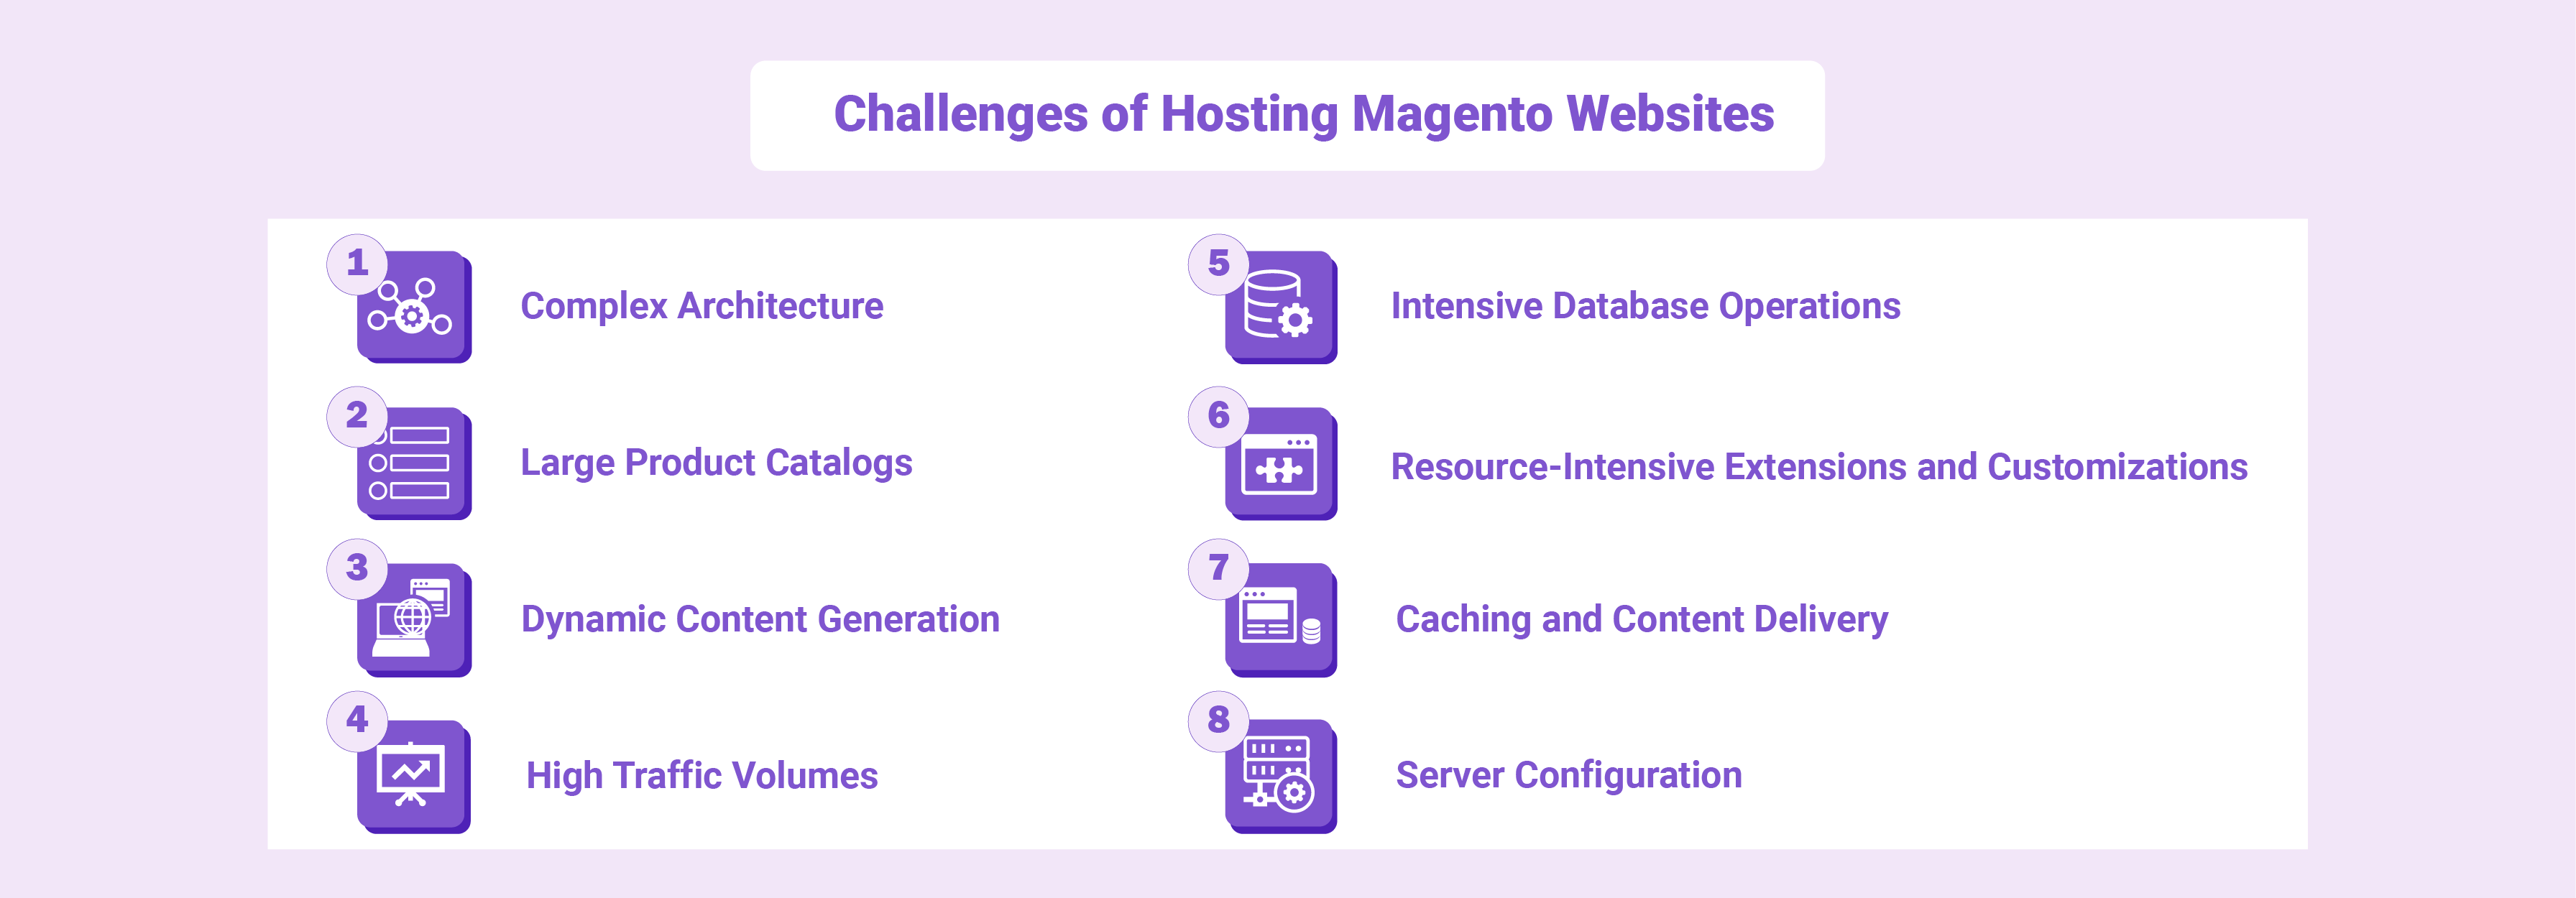 Common challenges faced when hosting Magento websites and how to overcome them